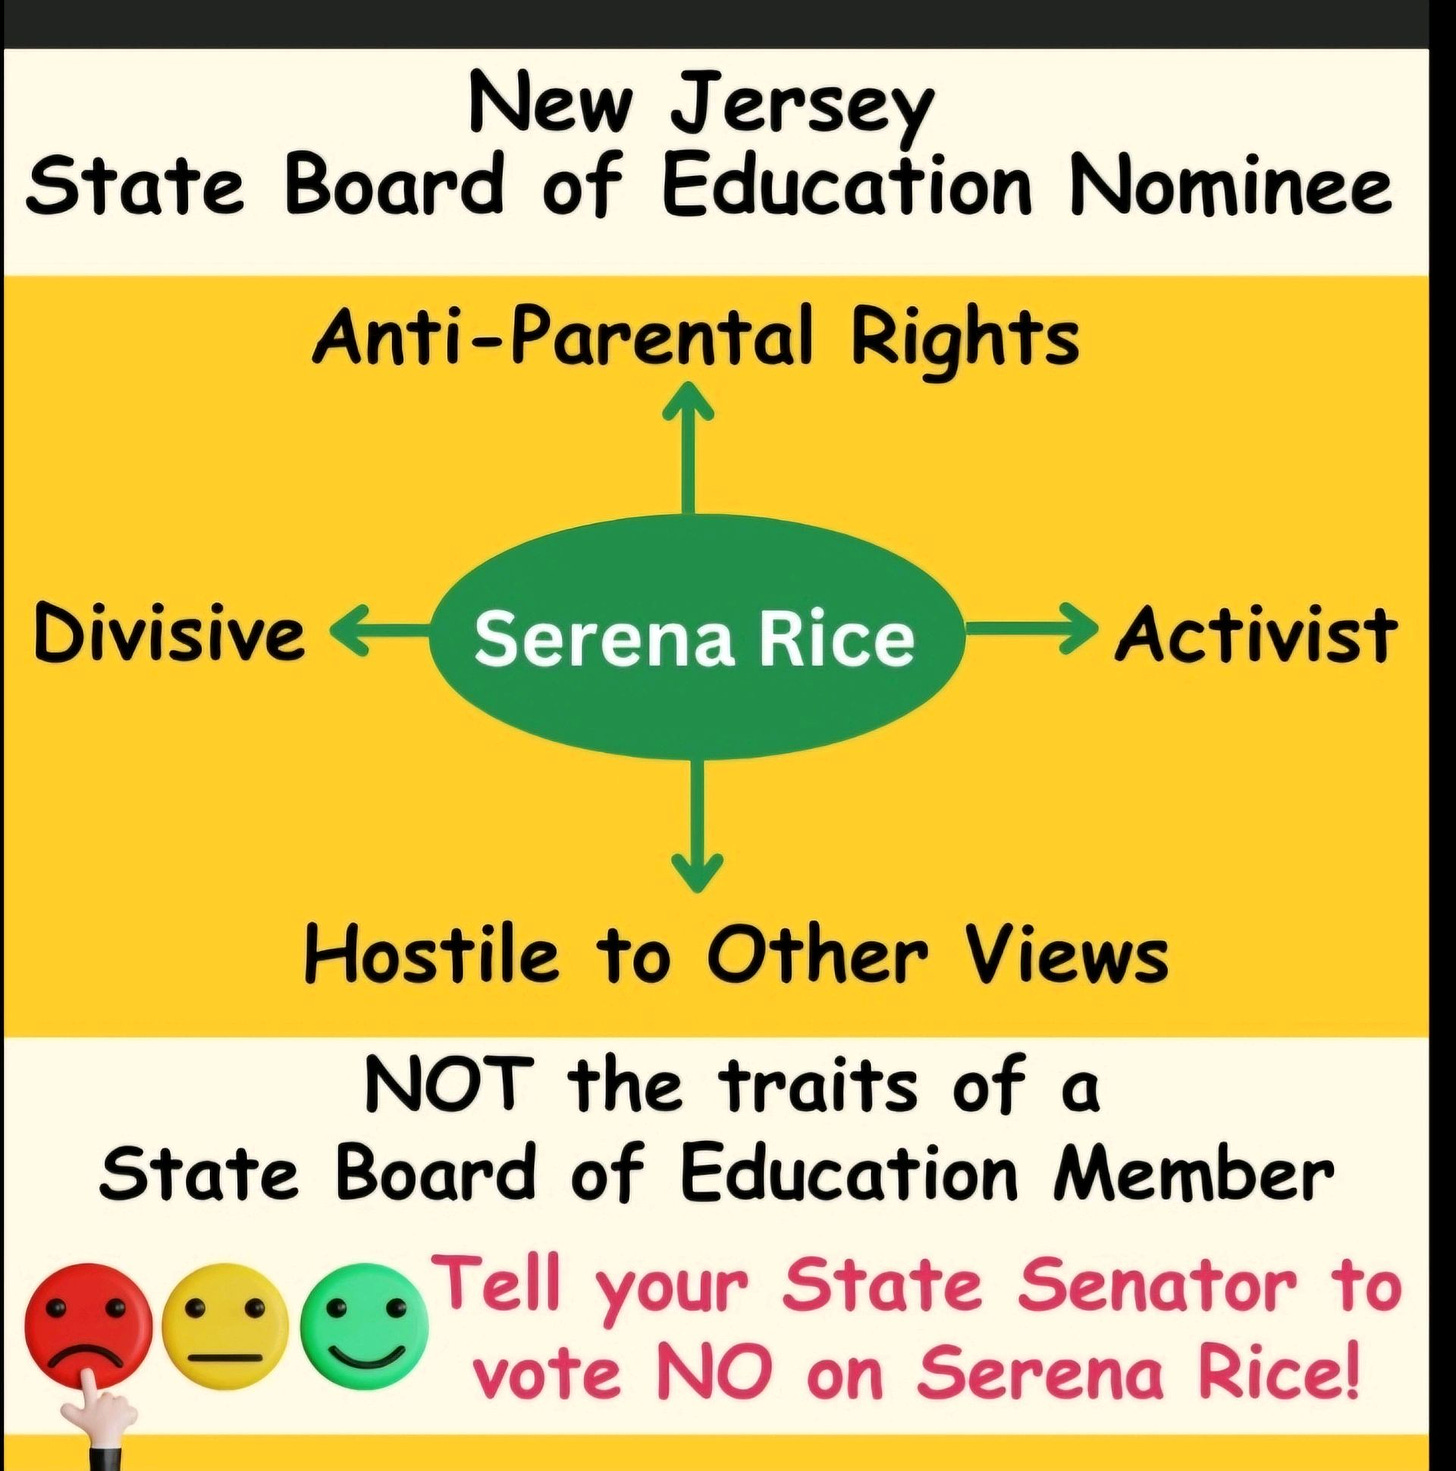 May be an image of text that says 'New Jersey State Board of Education Nominee Anti- Anti-Parental Rights Divisive Serena DivisiveSerenaRice Rice Activist Hostile to Other Views NOT the traits of a State Board of Education Member Tell your State Senator to vote NO on Serena Rice!'